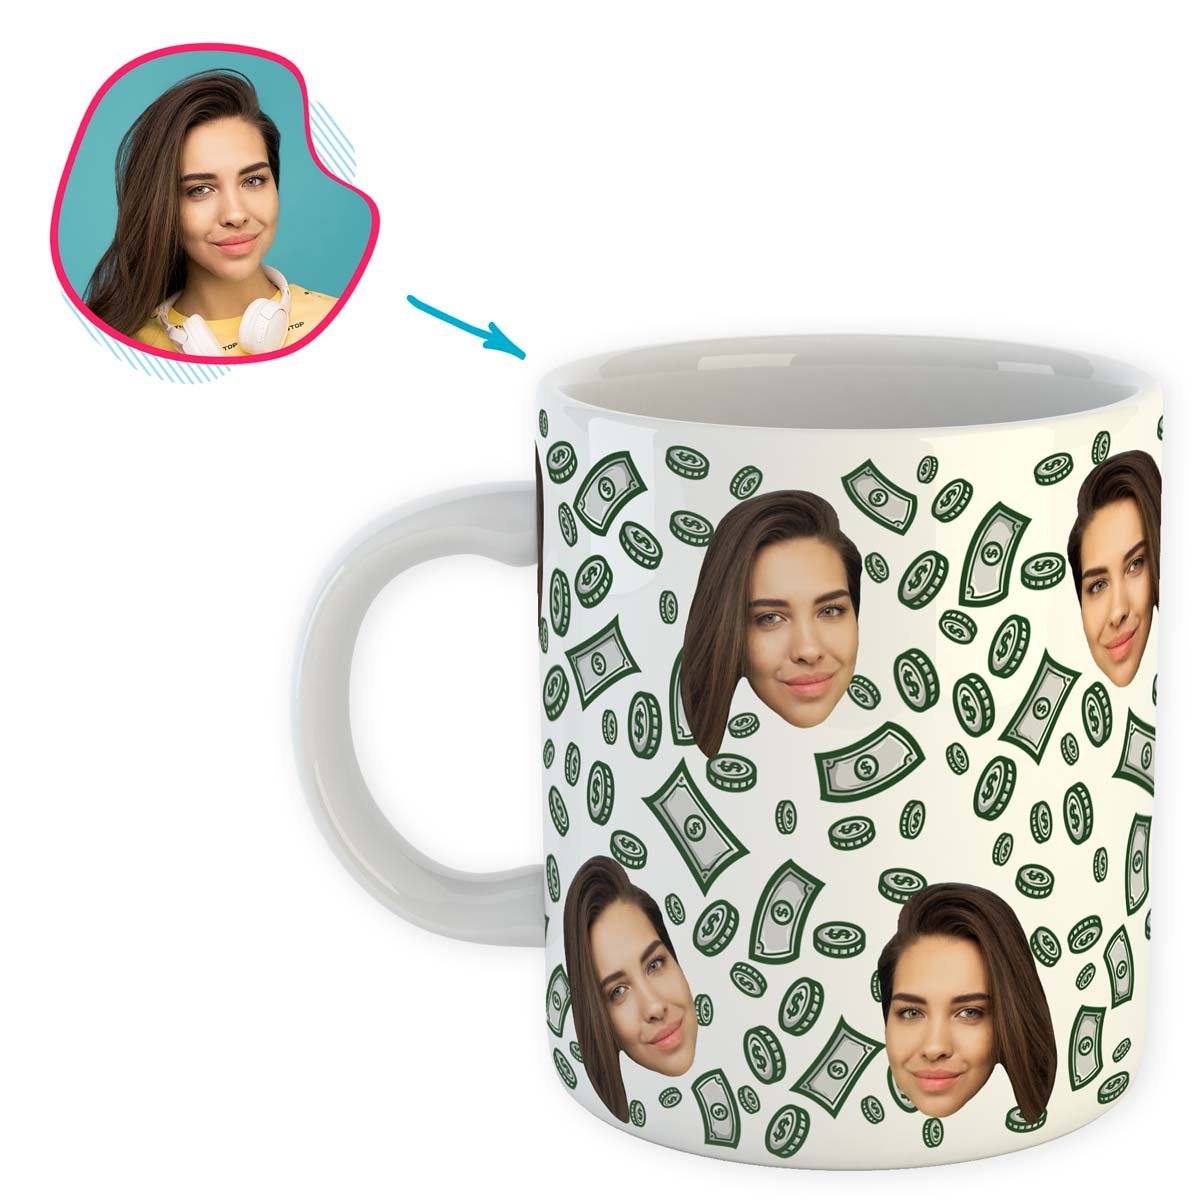 white Money mug personalized with photo of face printed on it